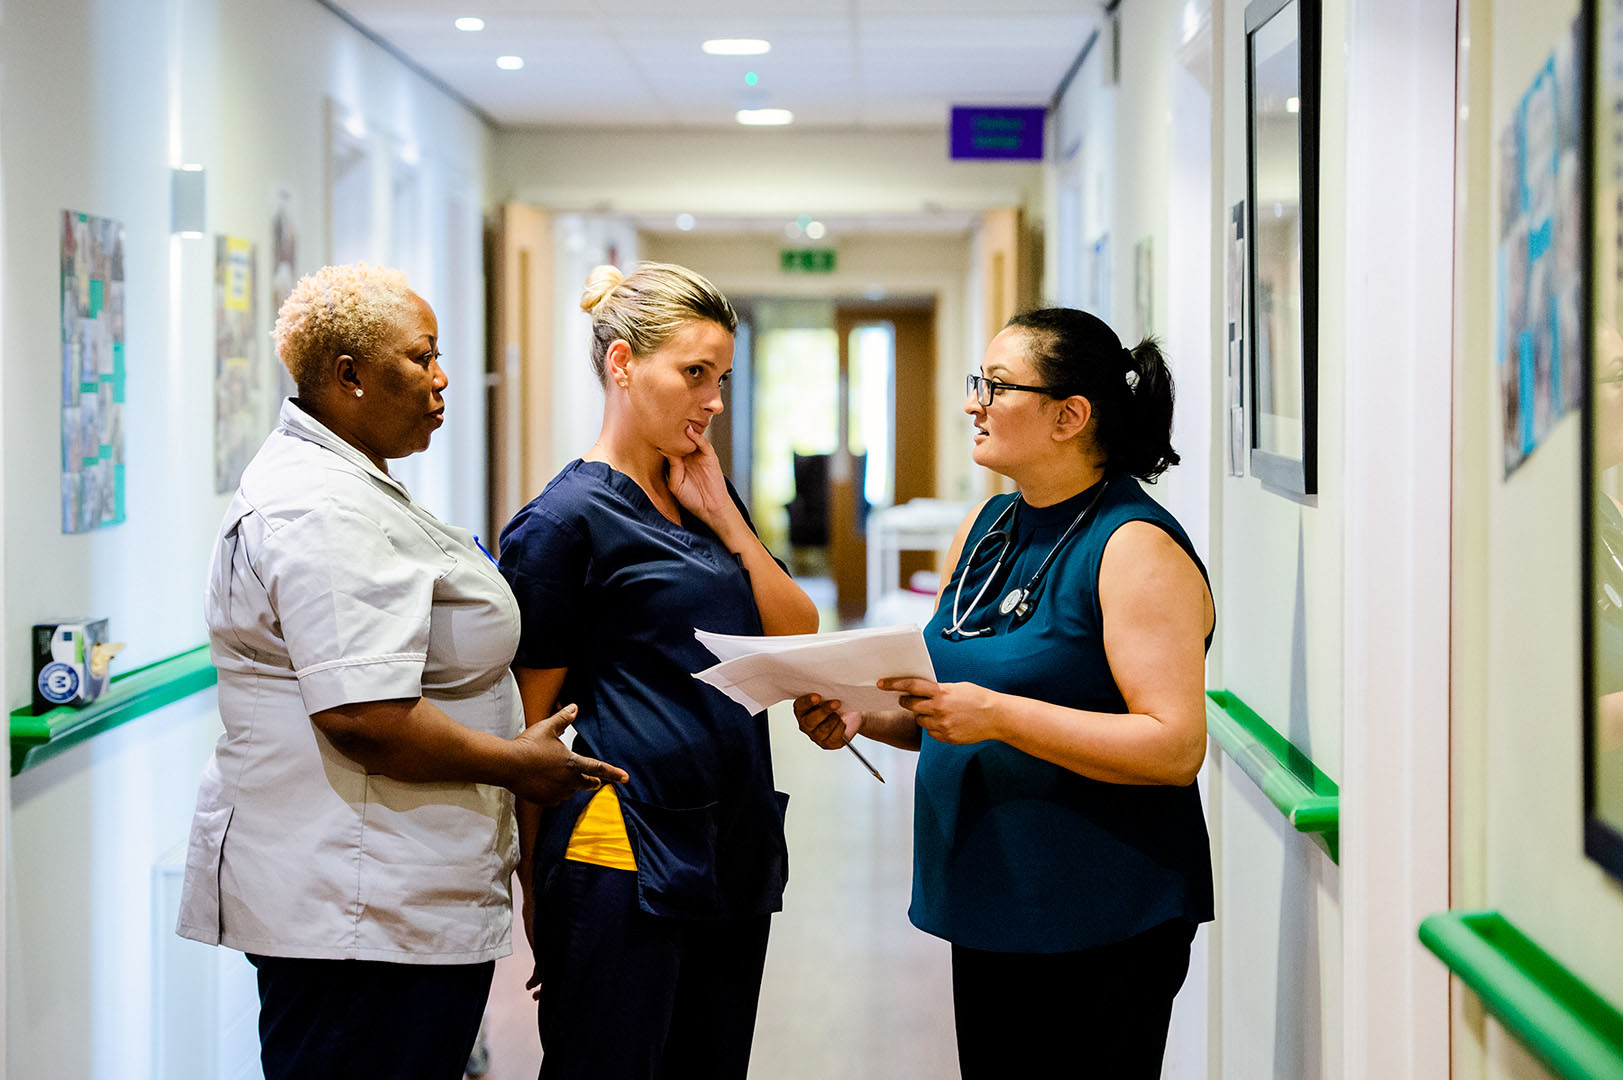 Doctor in discussion with Care Home staff in corridor